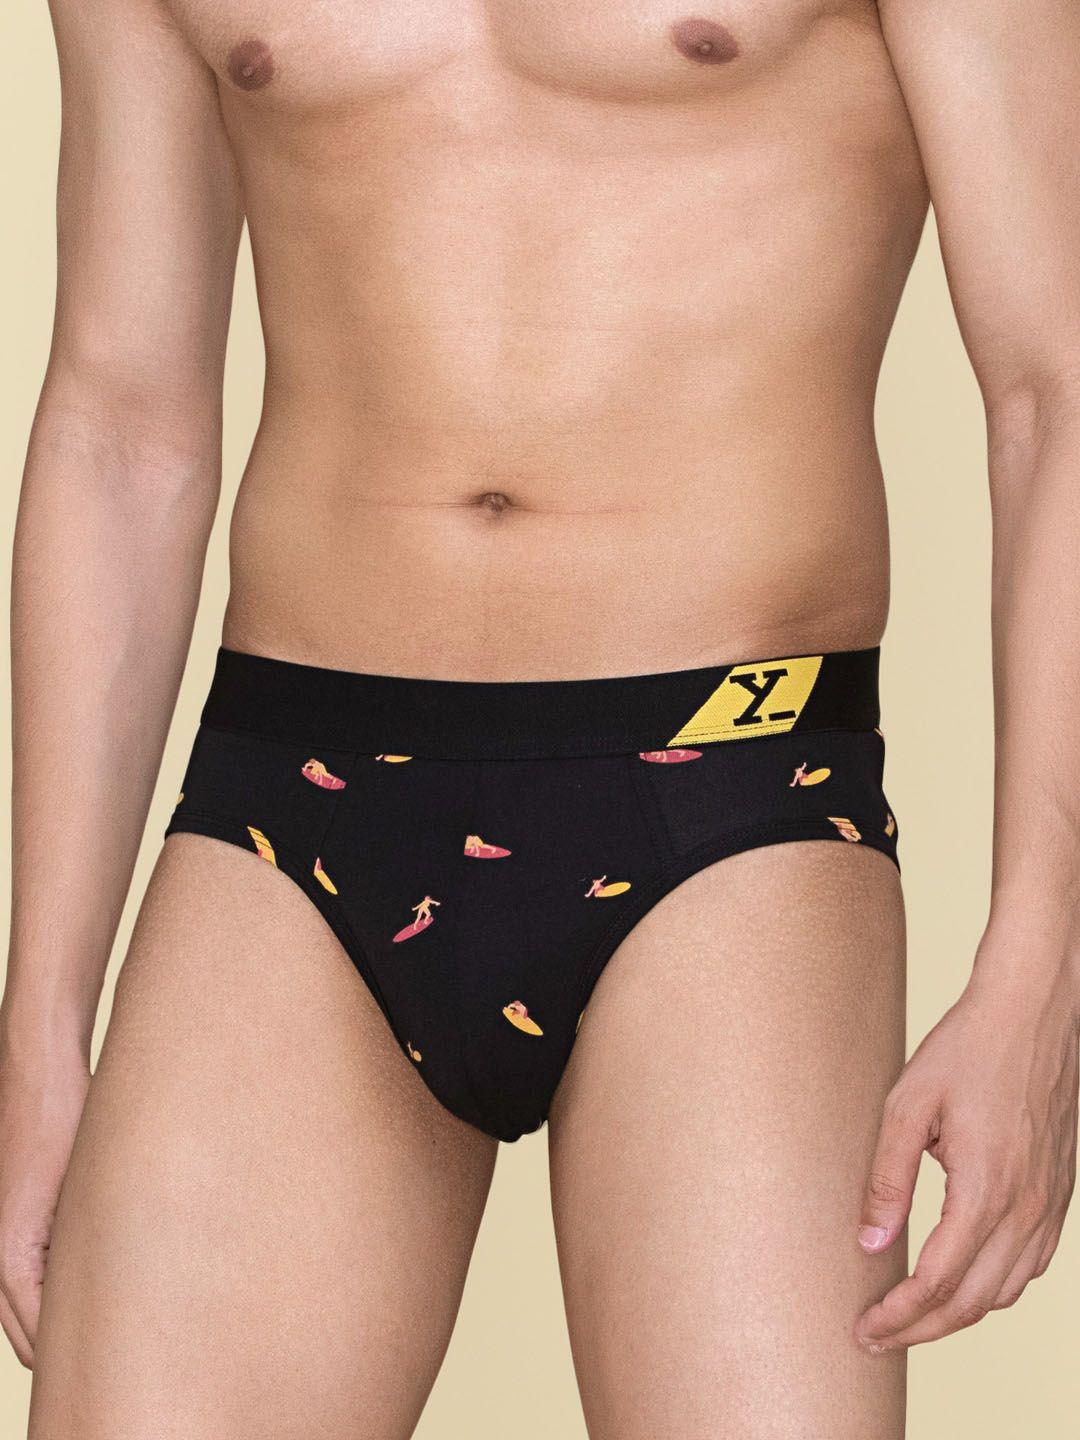 xyxx men printed combed cotton basic briefs xybrf197